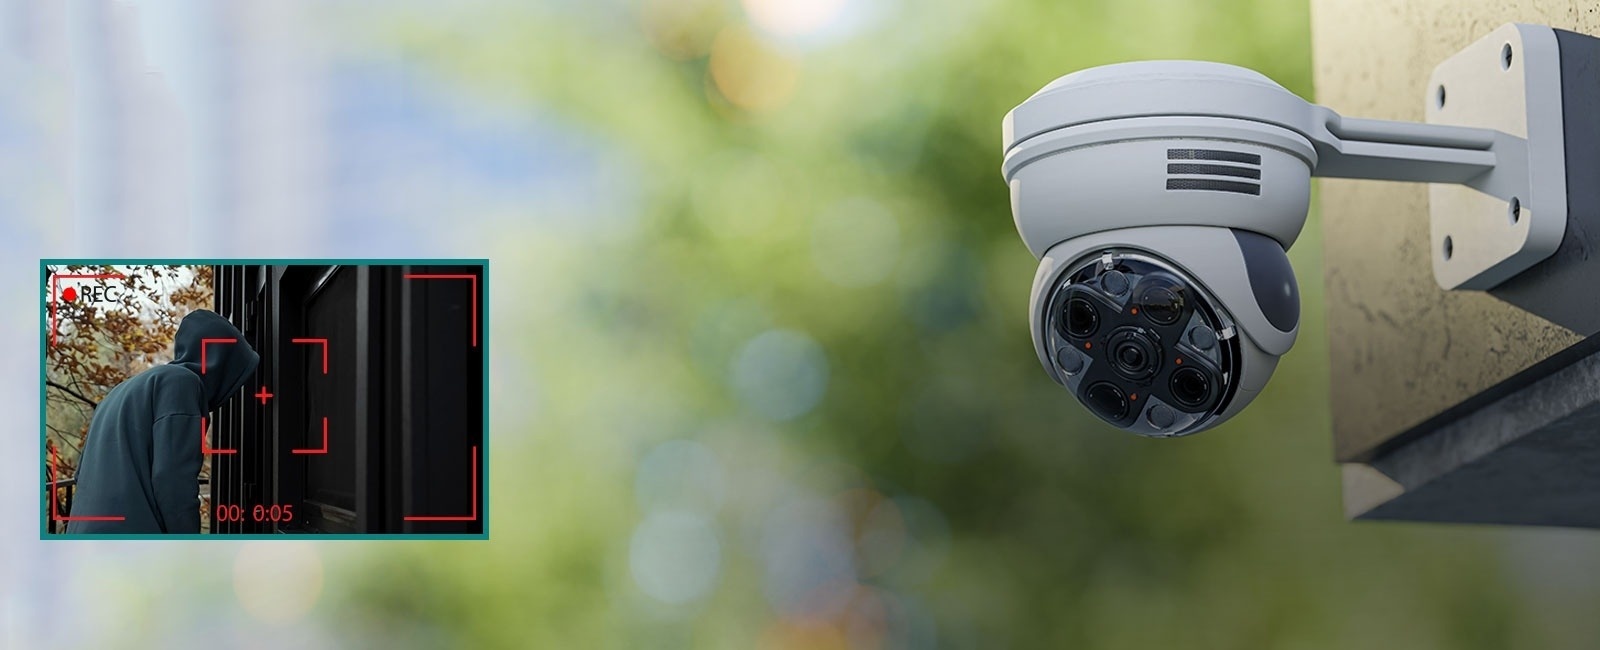 Omaha Security Solutions will design and install Security Systems that meet the needs of your business or home.